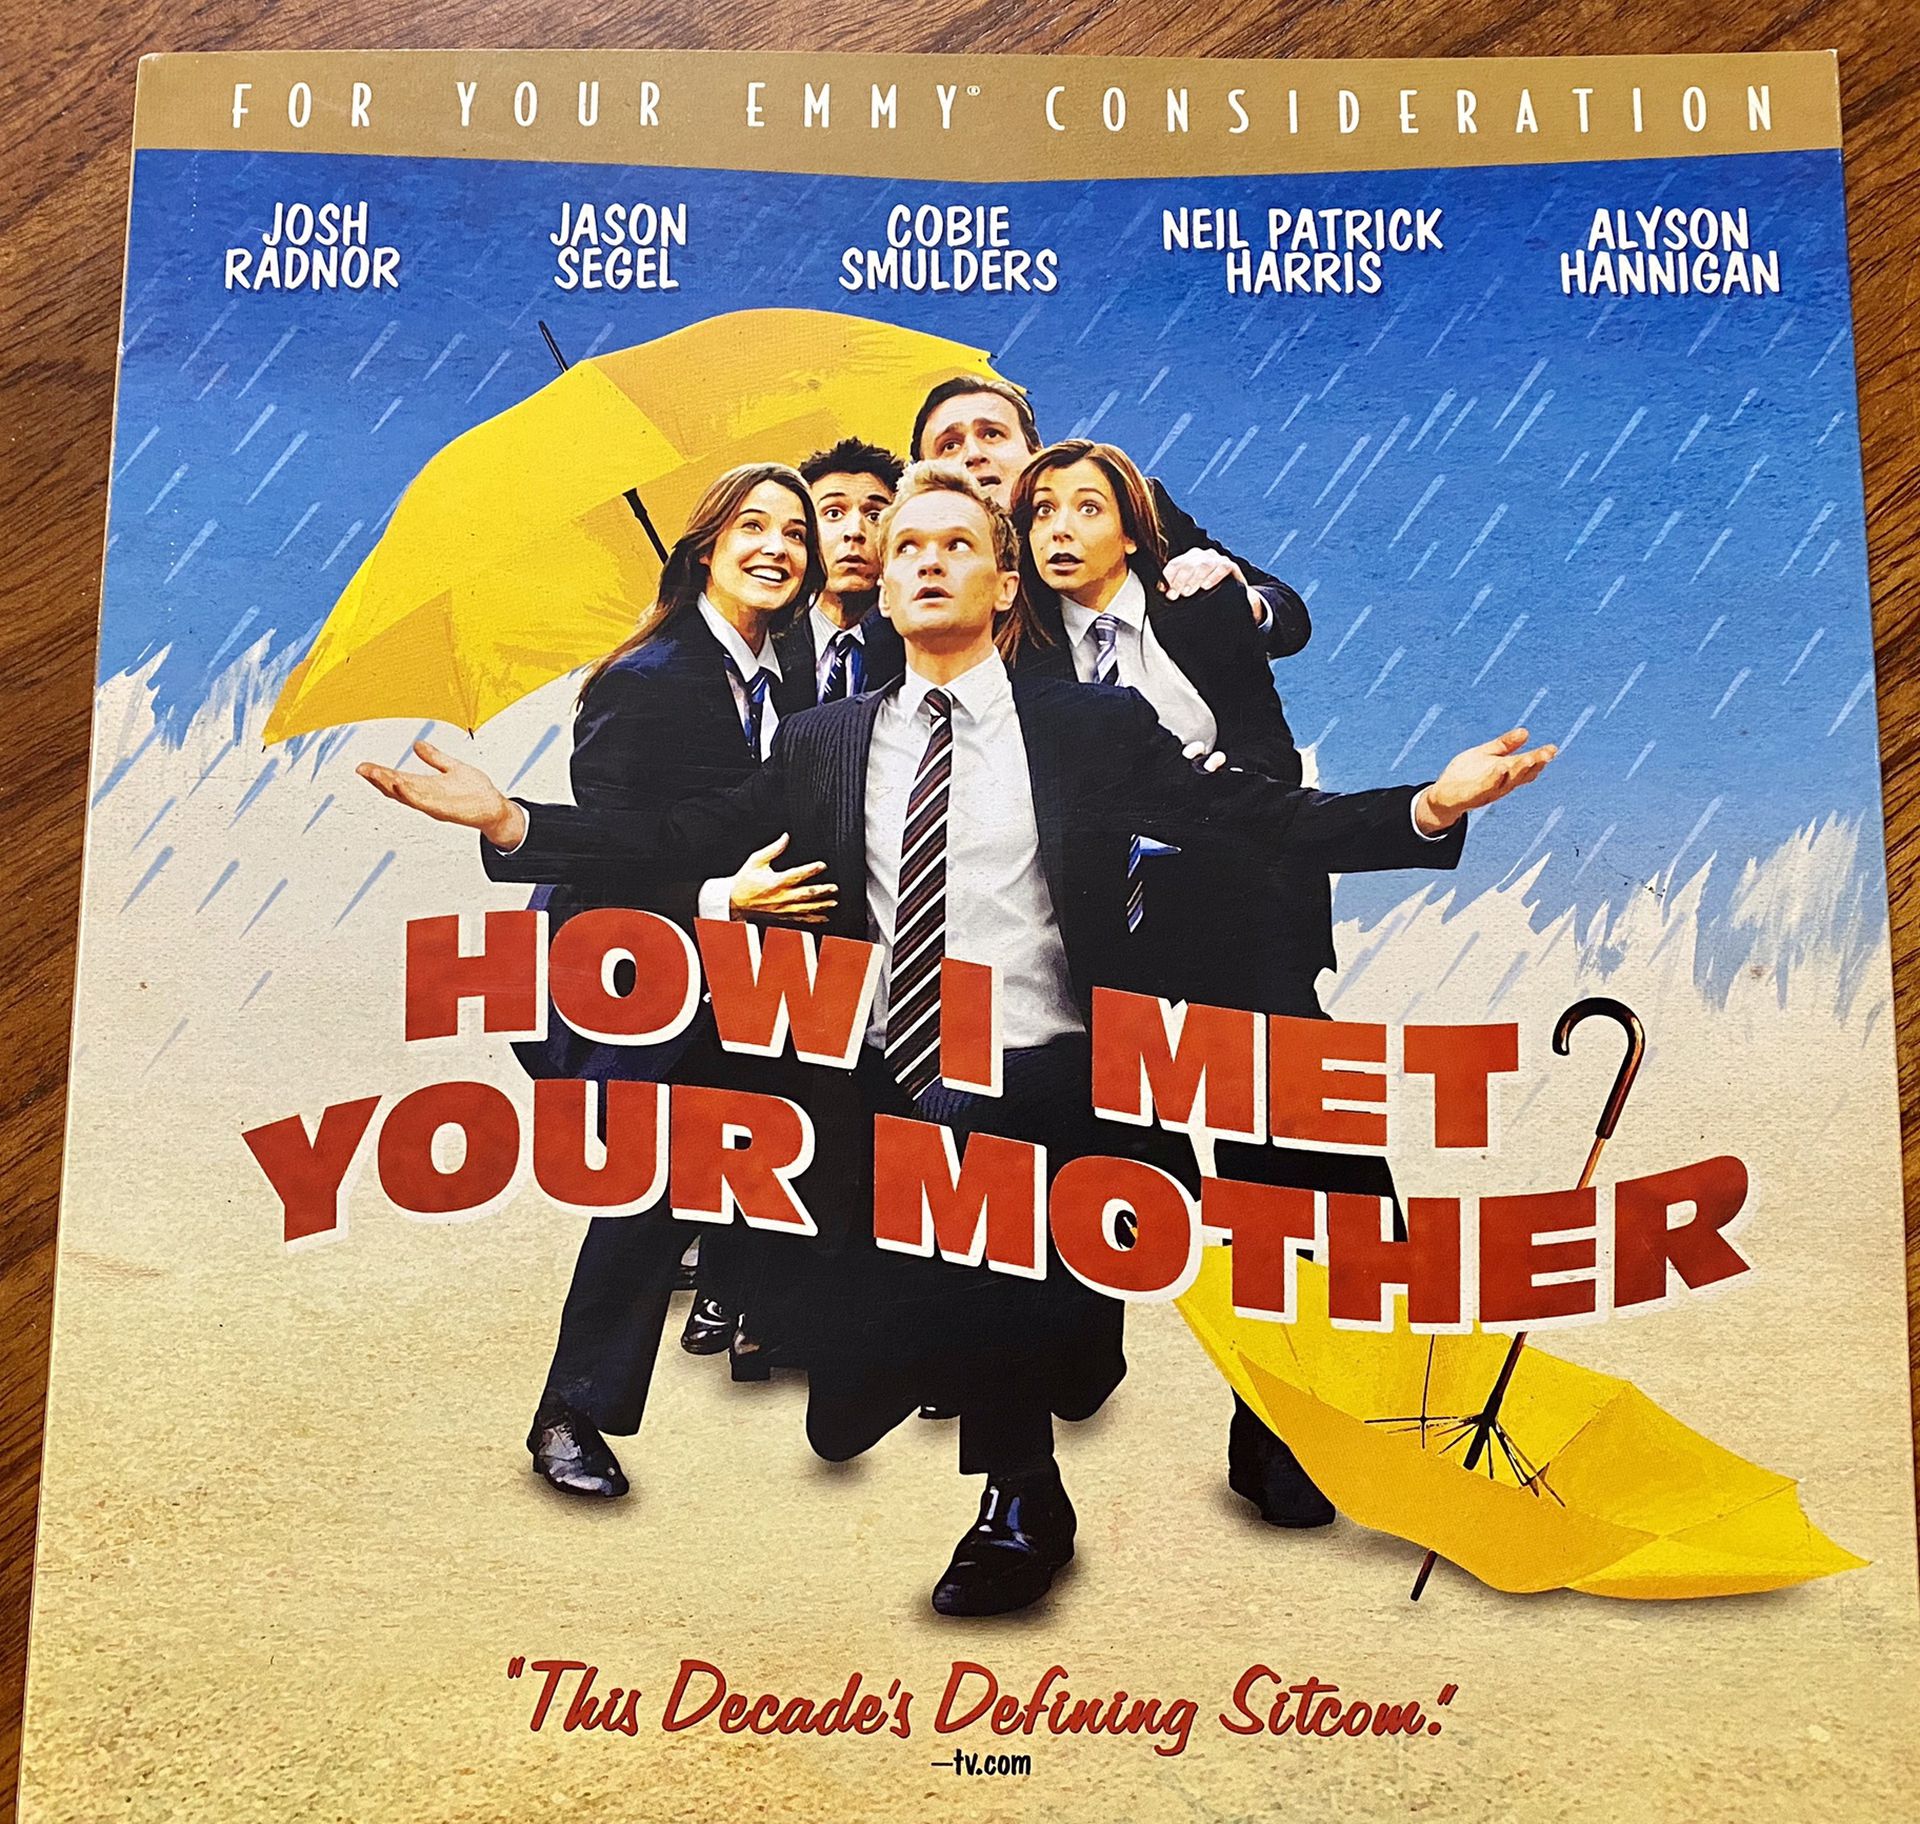 2010 EMMY CONSIDERATION “SECURE SCREENER” HOW I MET YOUR MOTHER DVD